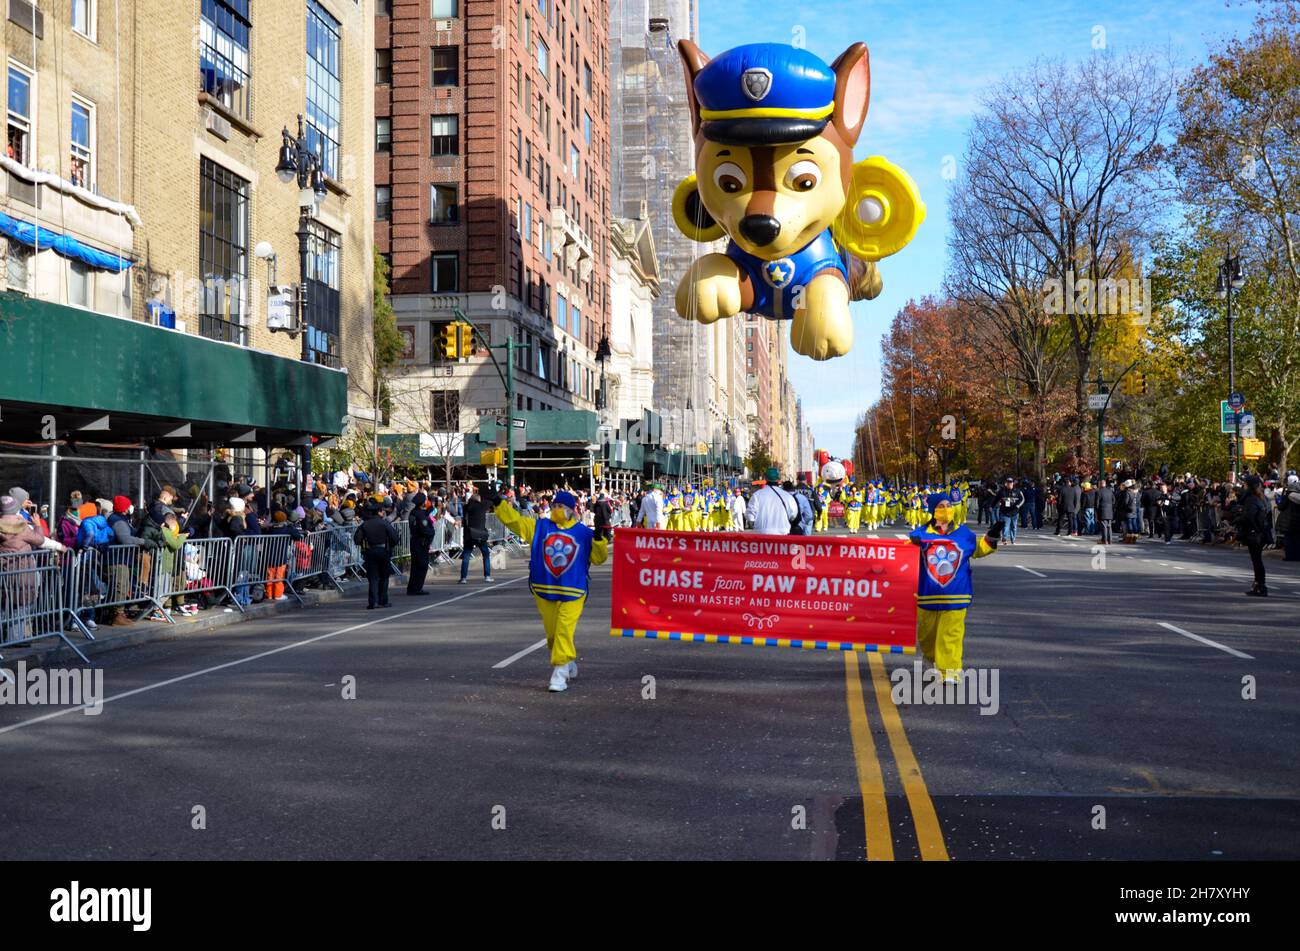 New York, United States. 25th Nov, 2021. Chase from Pow Patrol balloon is seen floating over Sixth Avenue during the 95th annual Macy's Thanksgiving Day Parade in New York City on November 25, 2021.Balloons of different characters seen floating over Sixth Avenue during the 95th annual Macy's Thanksgiving Day Parade in New York City on November 25, 2021. (Photo by Ryan Rahman/Pacific Press) Credit: Pacific Press Media Production Corp./Alamy Live News Stock Photo